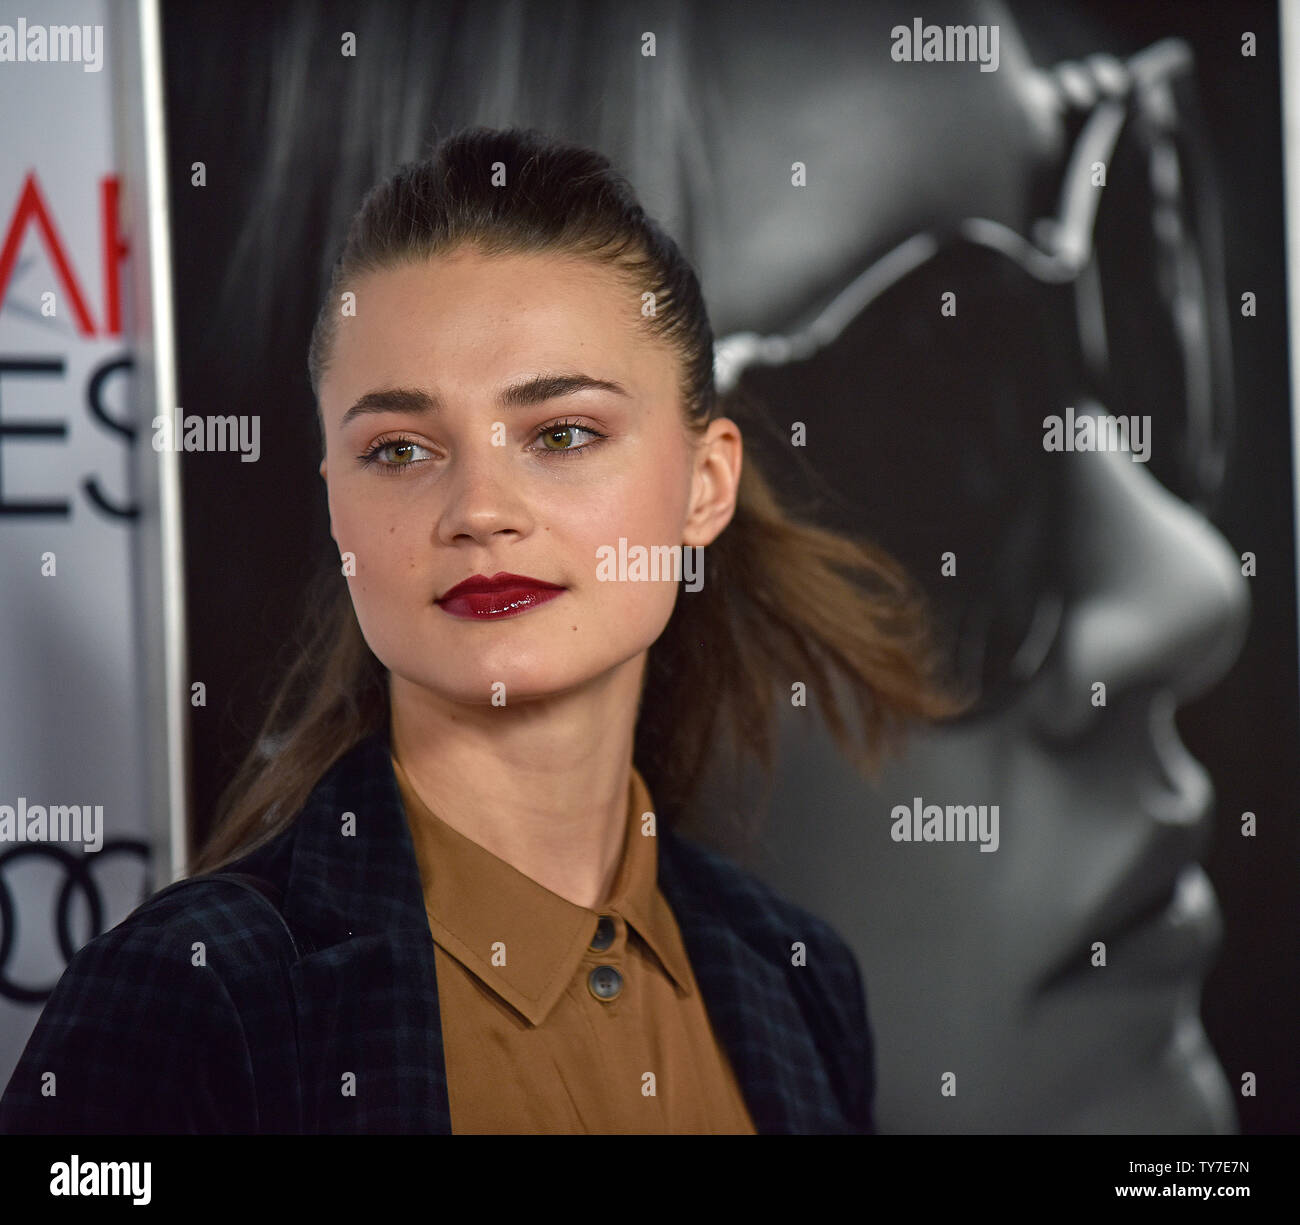 Model Veranika Irbis arrives for the AFI FEST Closing Night Gala screening of 'Molly's Game' at Hollywood's TCL Chinese Theatre in Los Angeles on November 16, 2017. Photo by Christine Chew/UPI Stock Photo